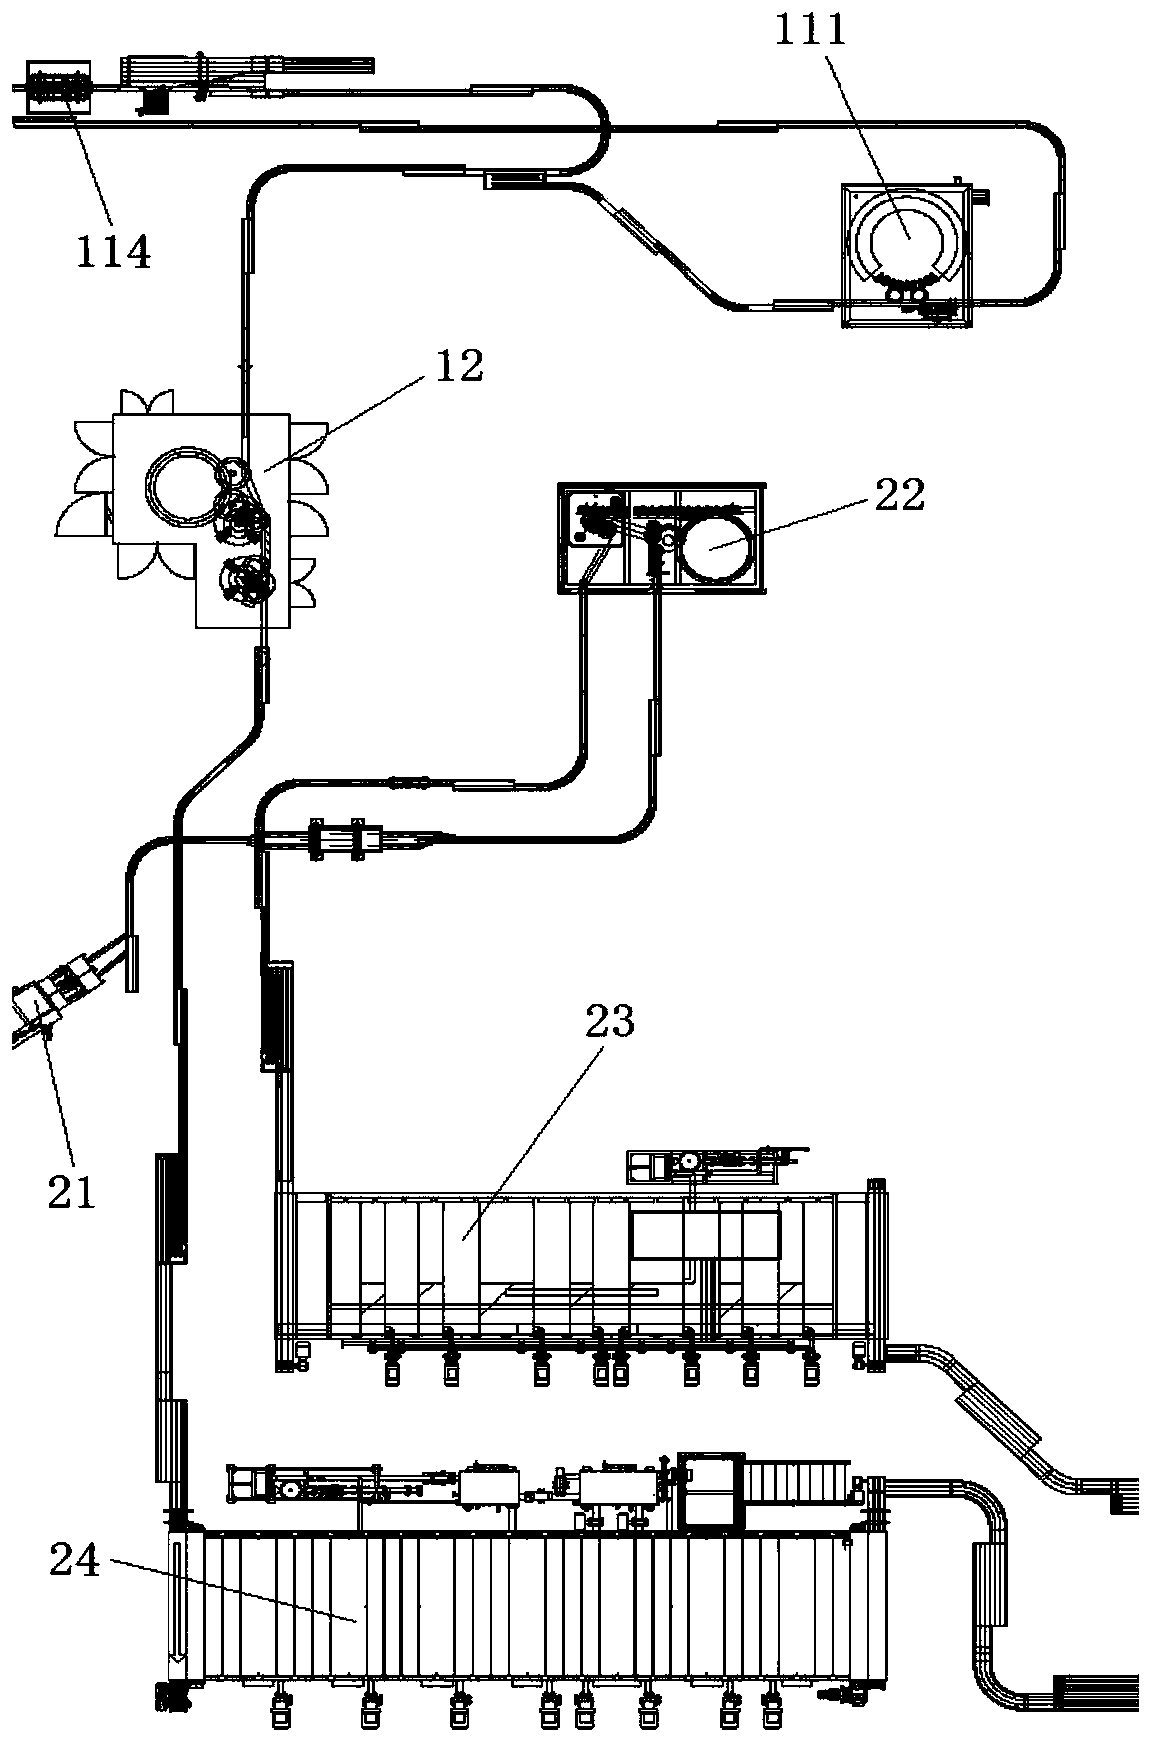 Flexible production system for beer production